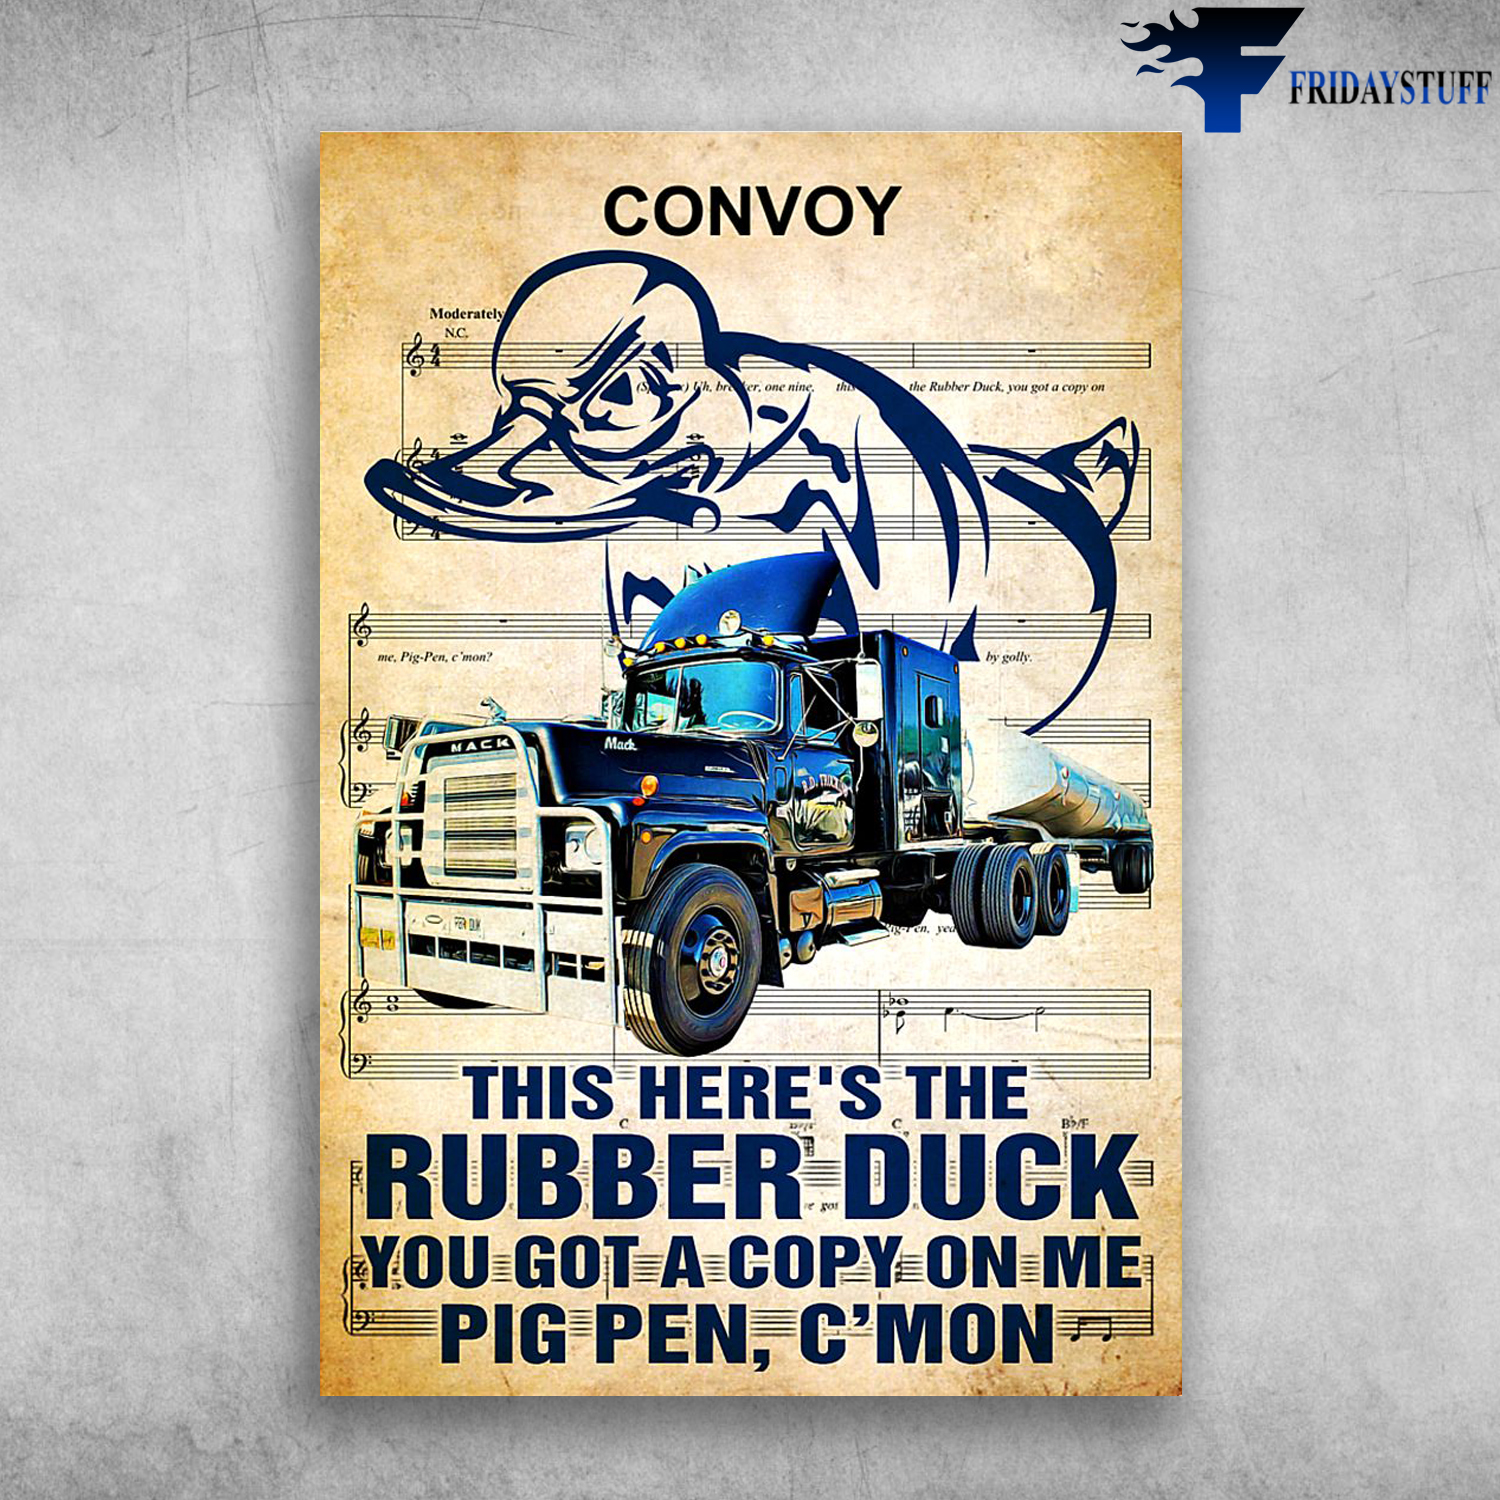 Trouwens Onderbreking broeden Convoy Film and The Truck_This Here's The Rubber Duck - FridayStuff